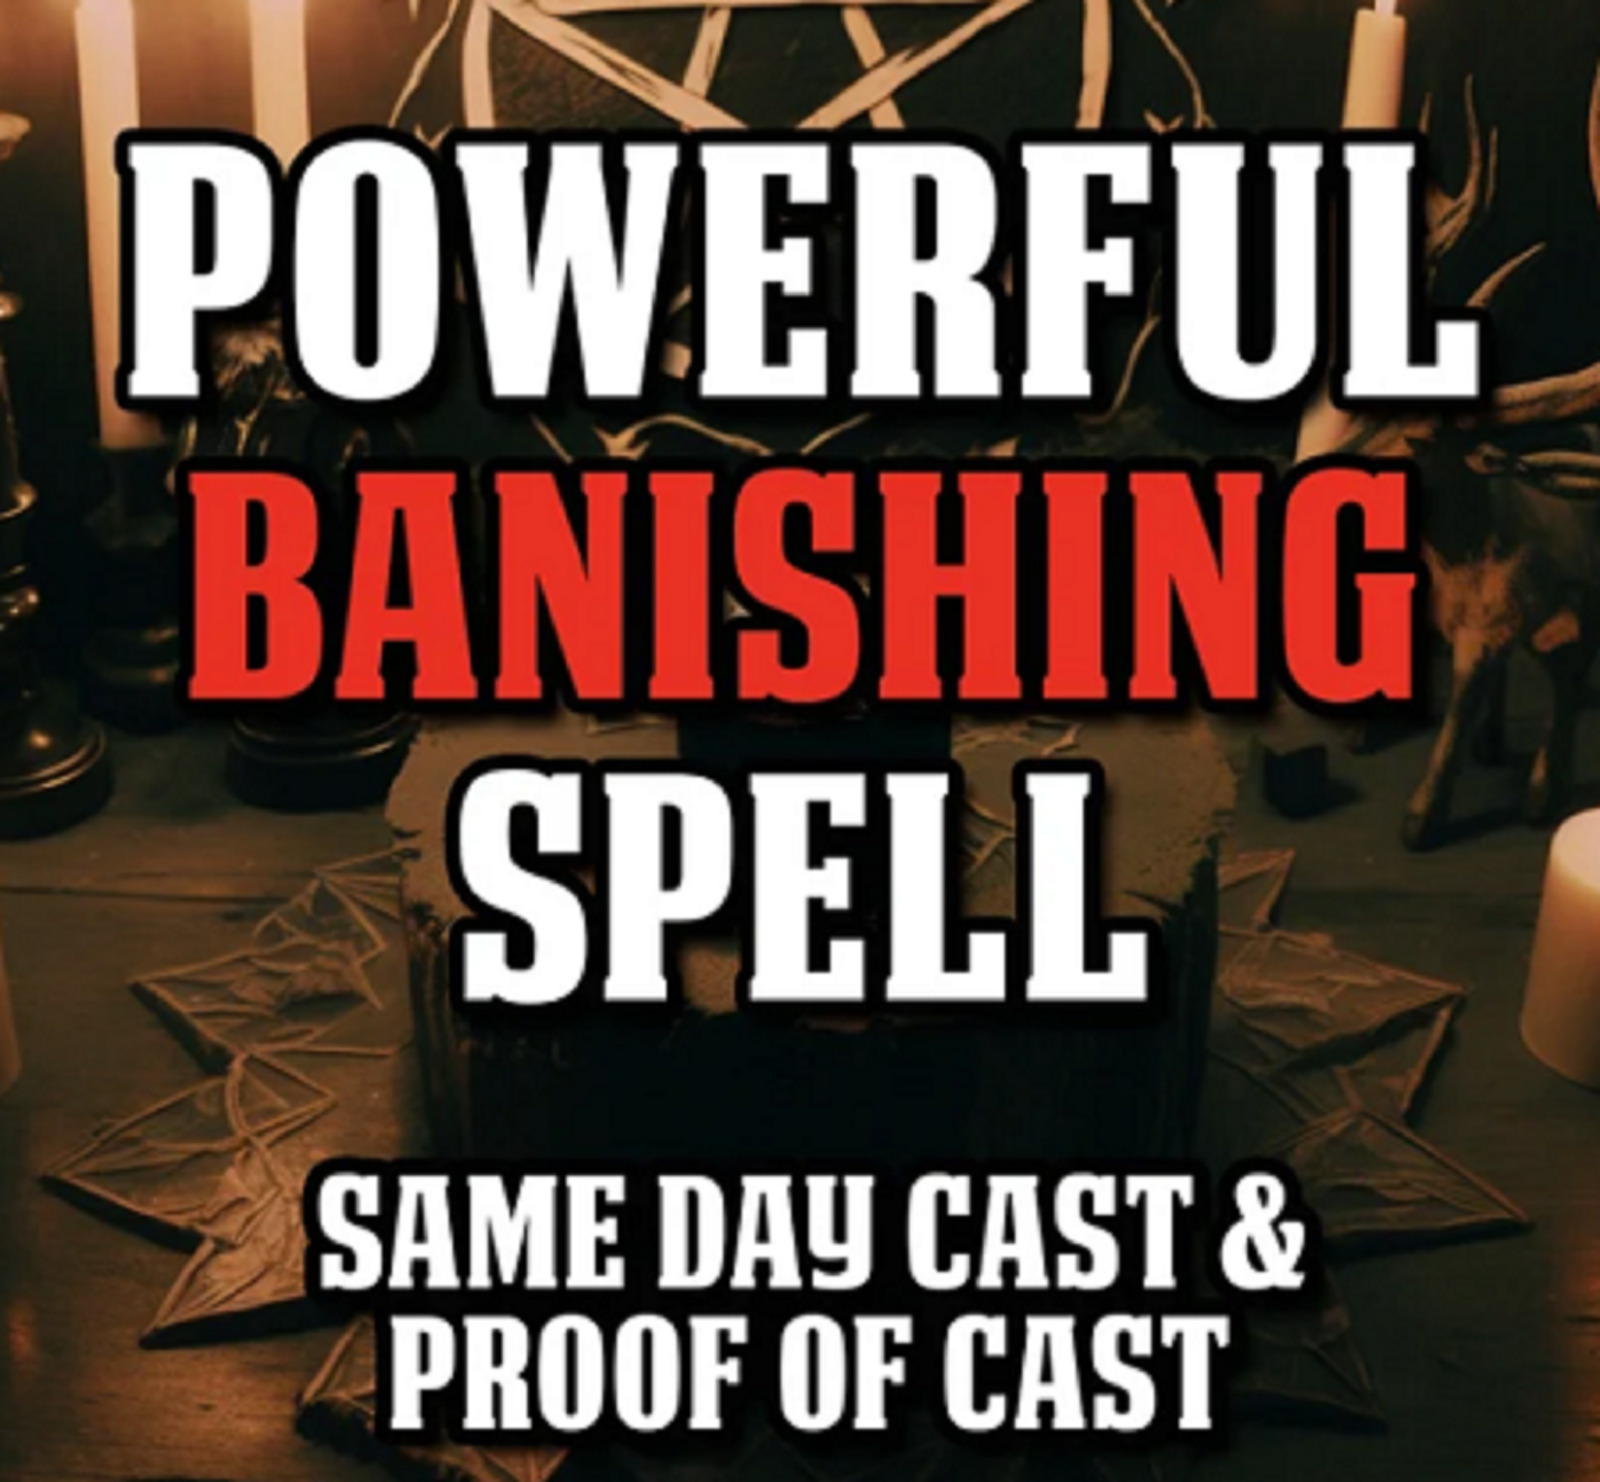 Powerful BANISHING SPELL - Banish Someone Or Something, Same Day, Fast Results